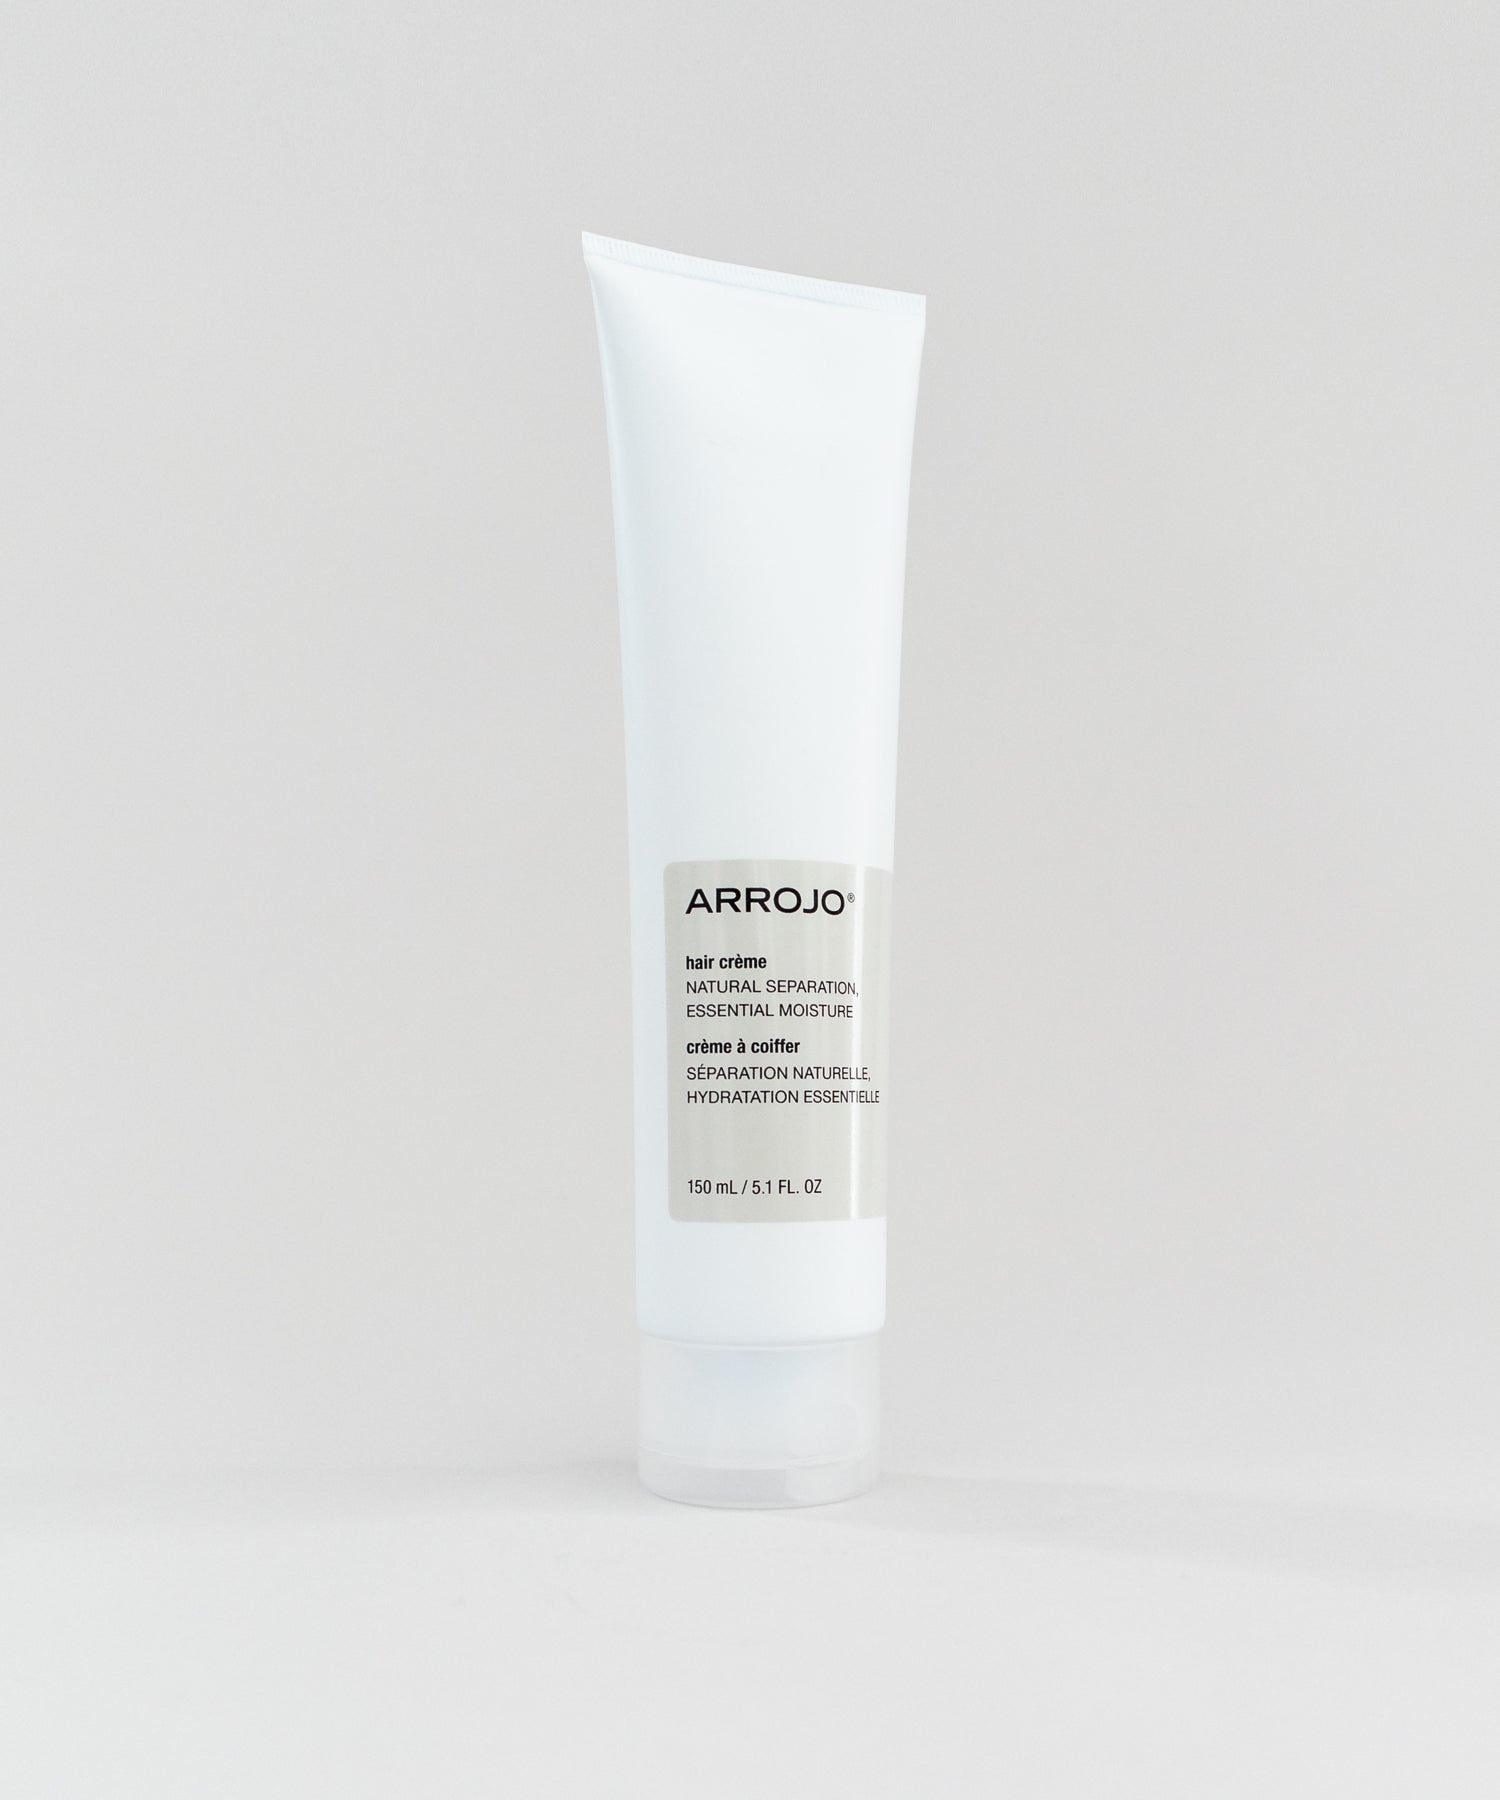 Arrojo Versatile hair crème. Gives a glossy, silky texture to the hair. 